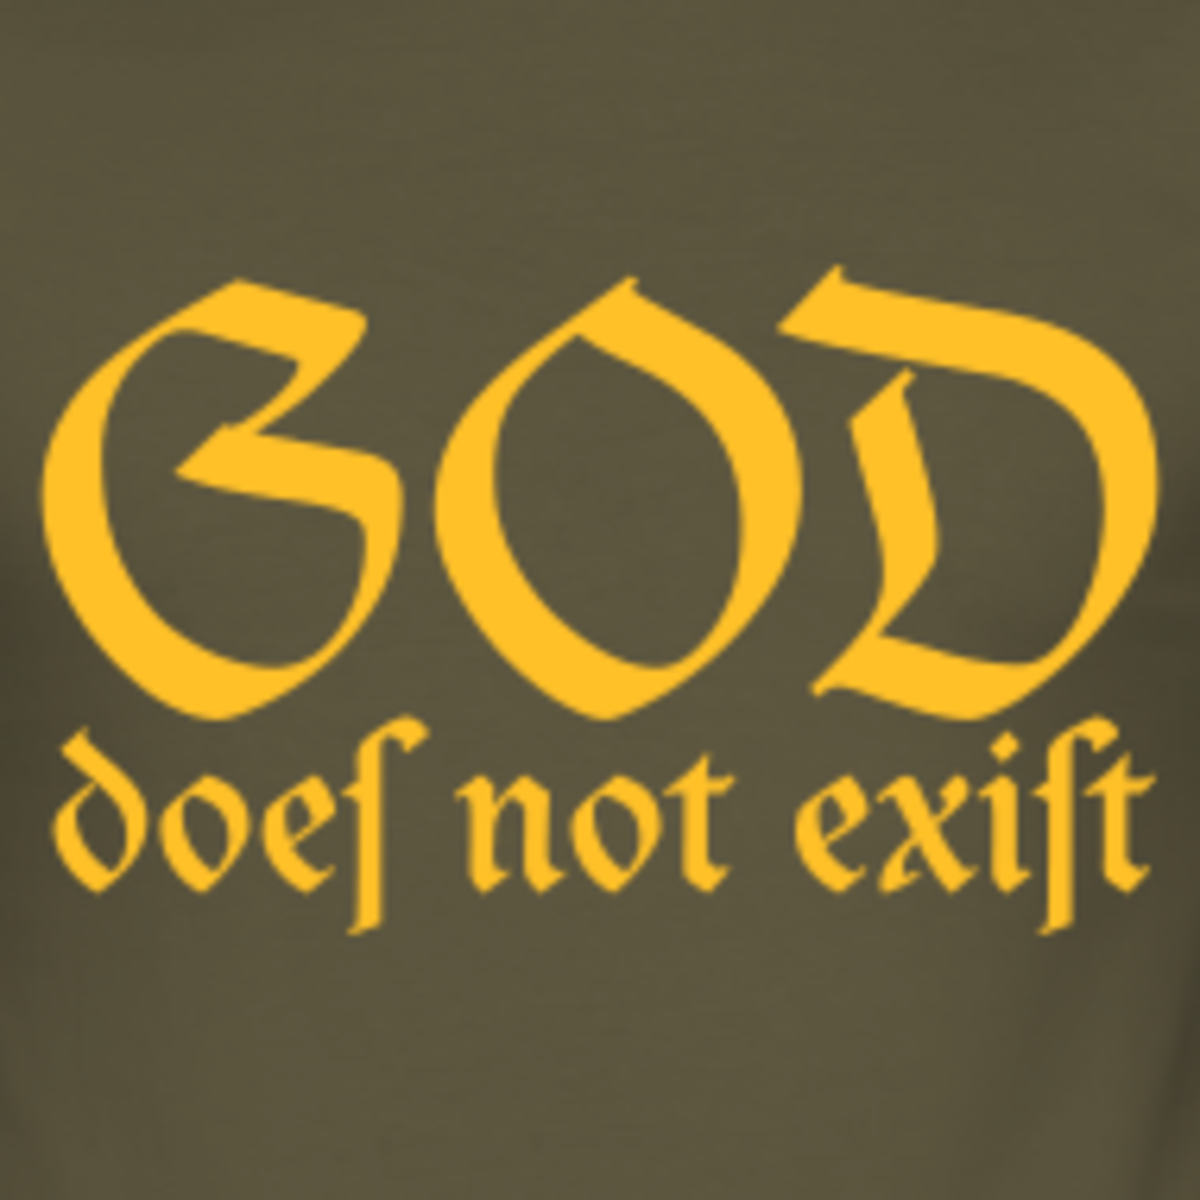 god-does-not-exist-it-is-impossible-for-a-god-to-exist